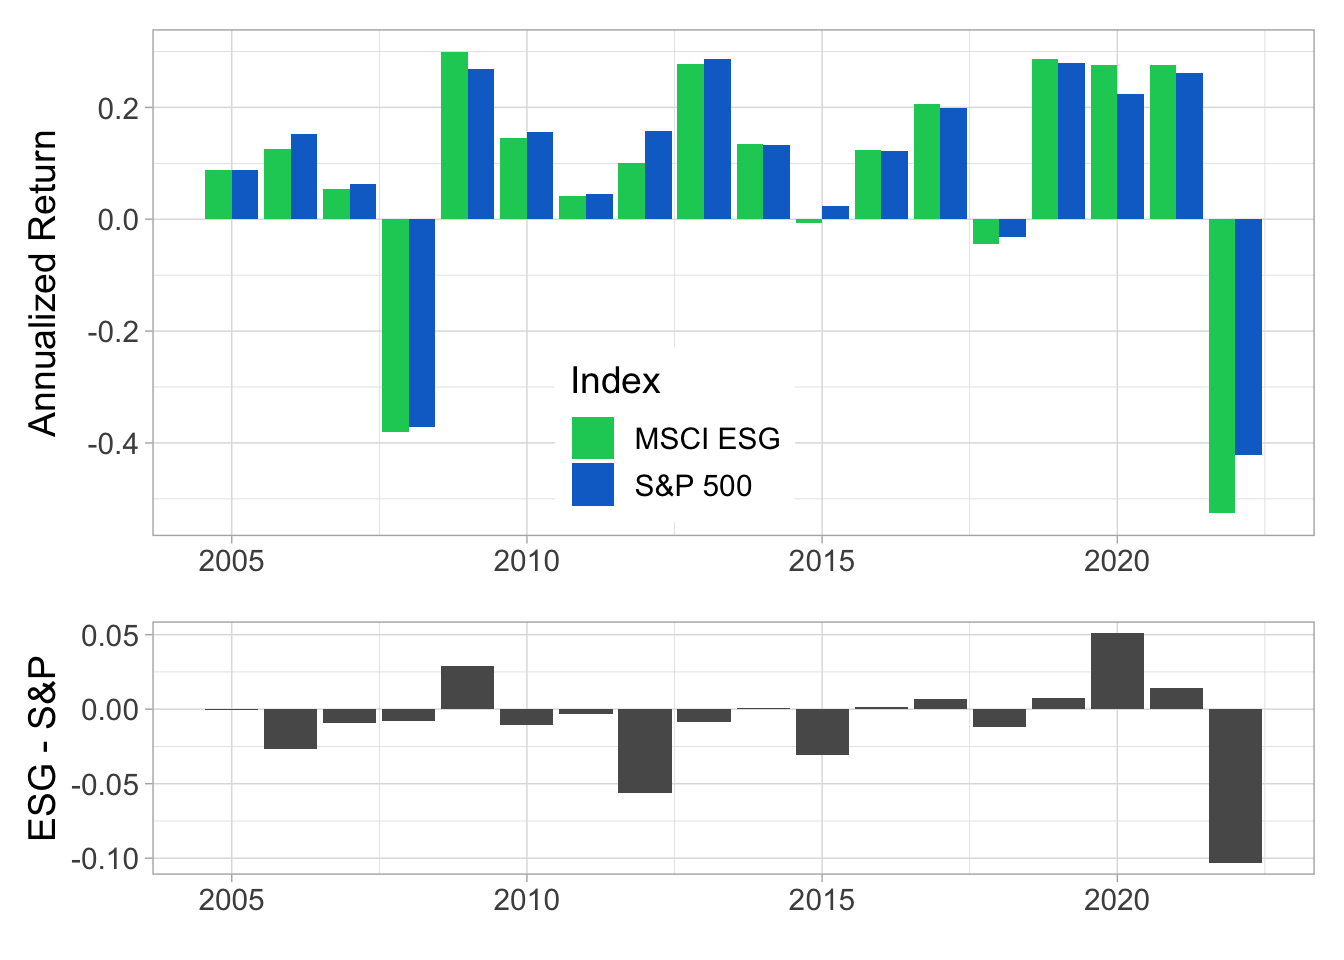 Annual returns. In the upper panel, we plot the average daily returns multiplied by 252, on a year-by-year basis. The lower panel shows the difference between the two indices (MSCI ESG minus S&P 500).